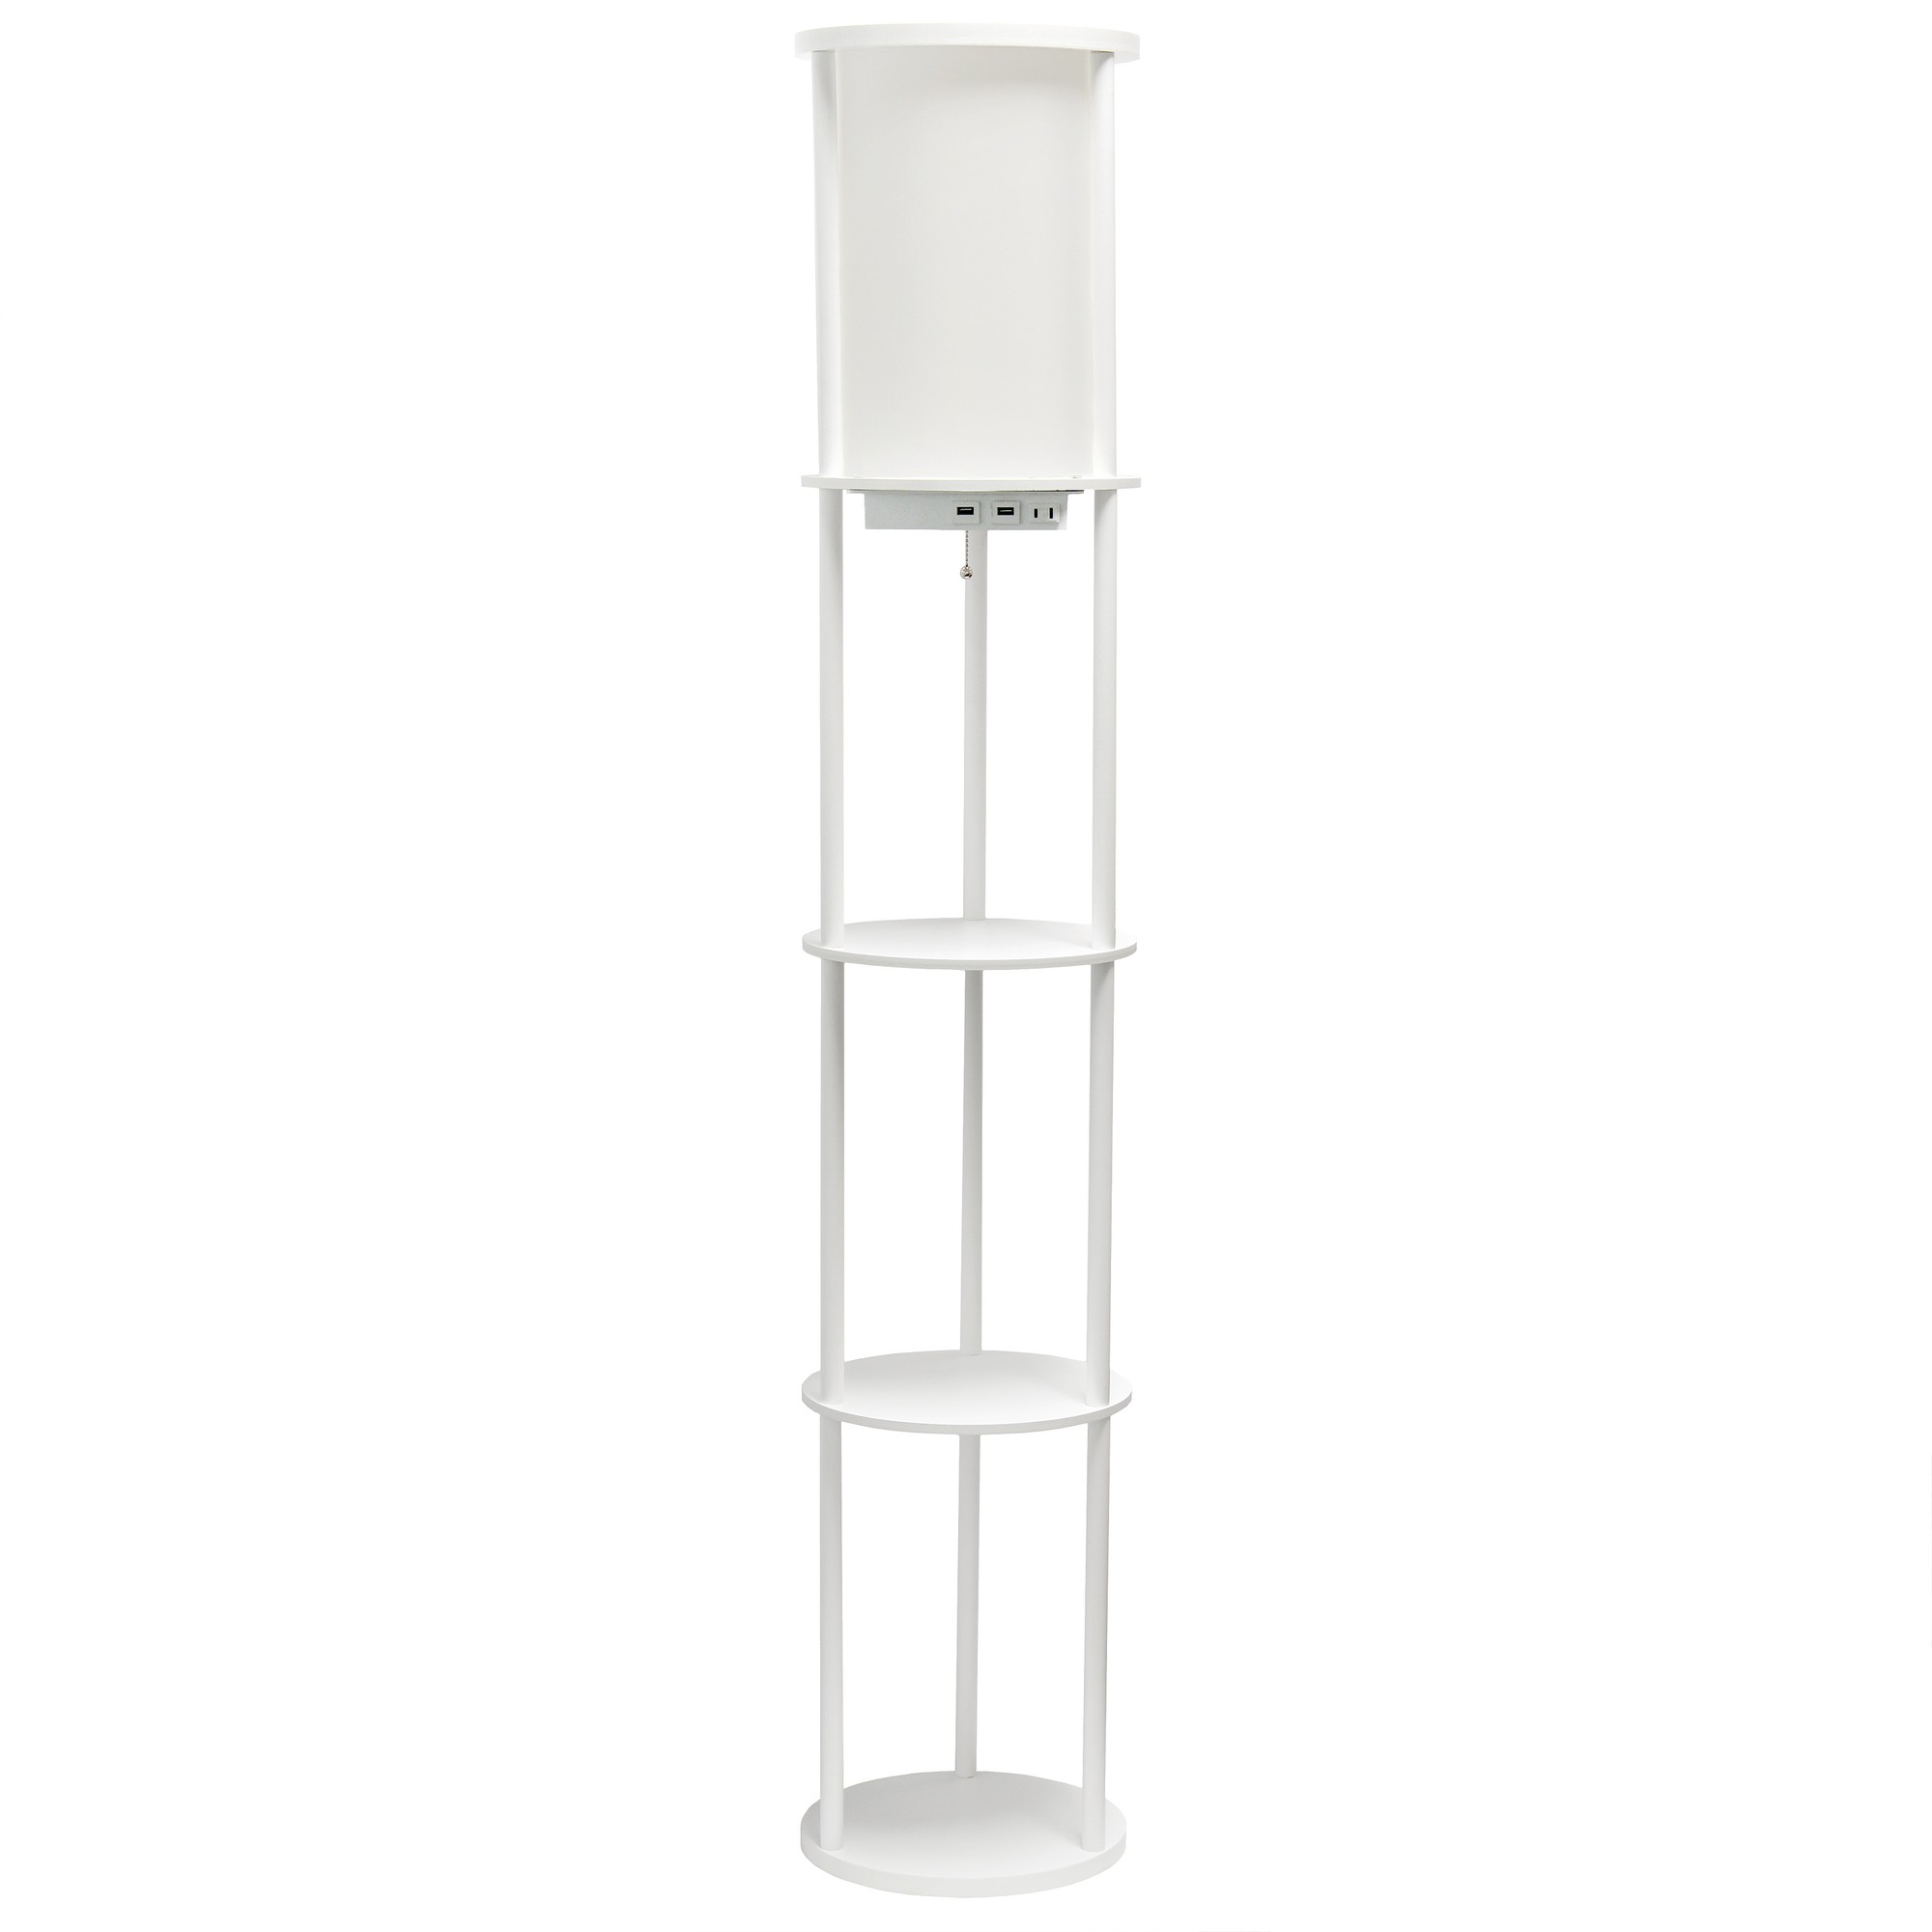 Simple Designs 62.5" Round Storage Floor Lamp with 2 USB Charging Ports, 1 Charging Outlet and Linen Shade, White